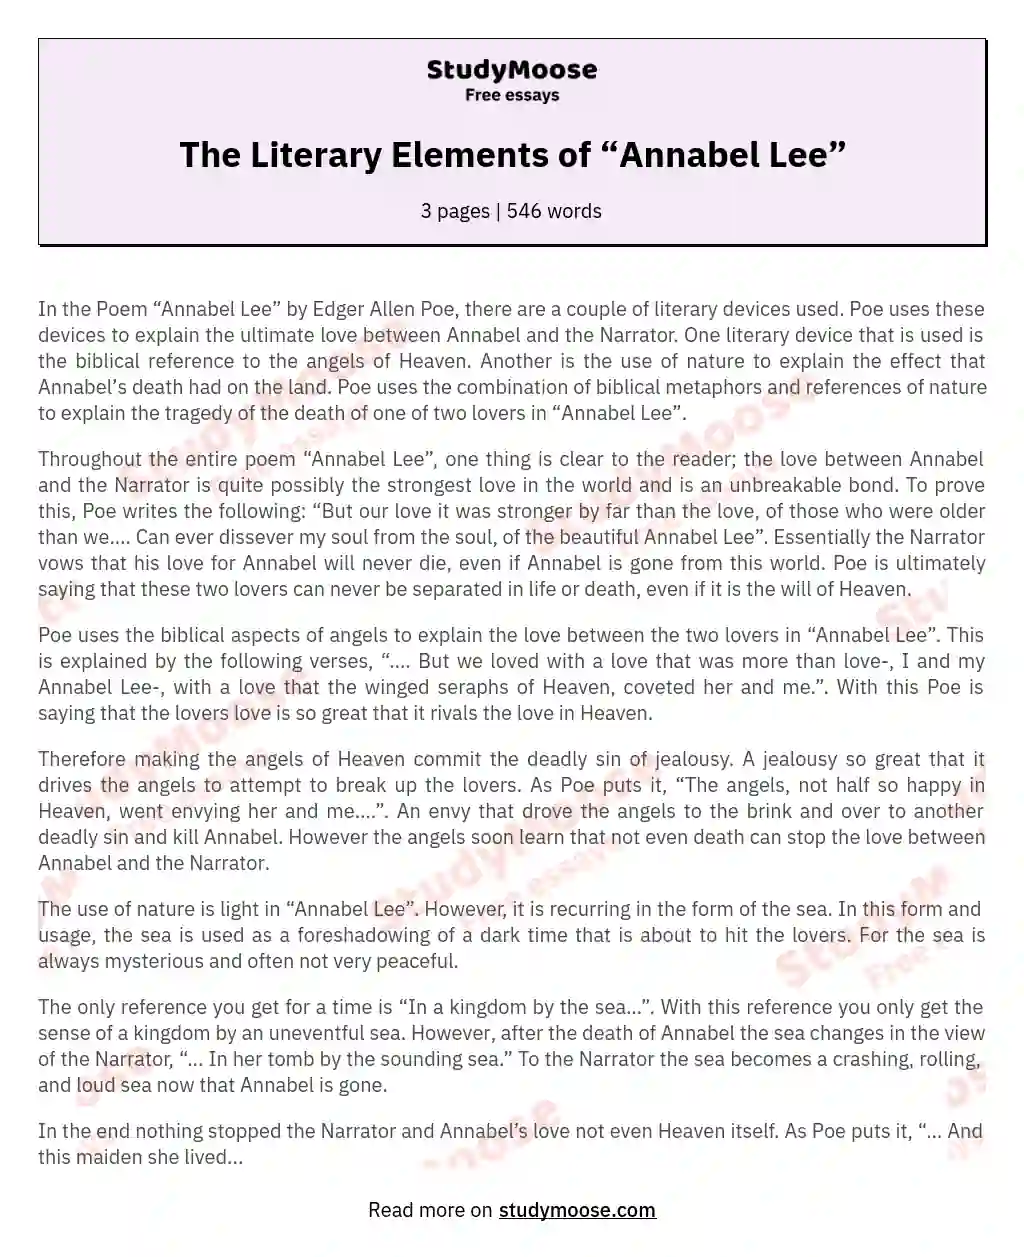 The Literary Elements of “Annabel Lee” essay